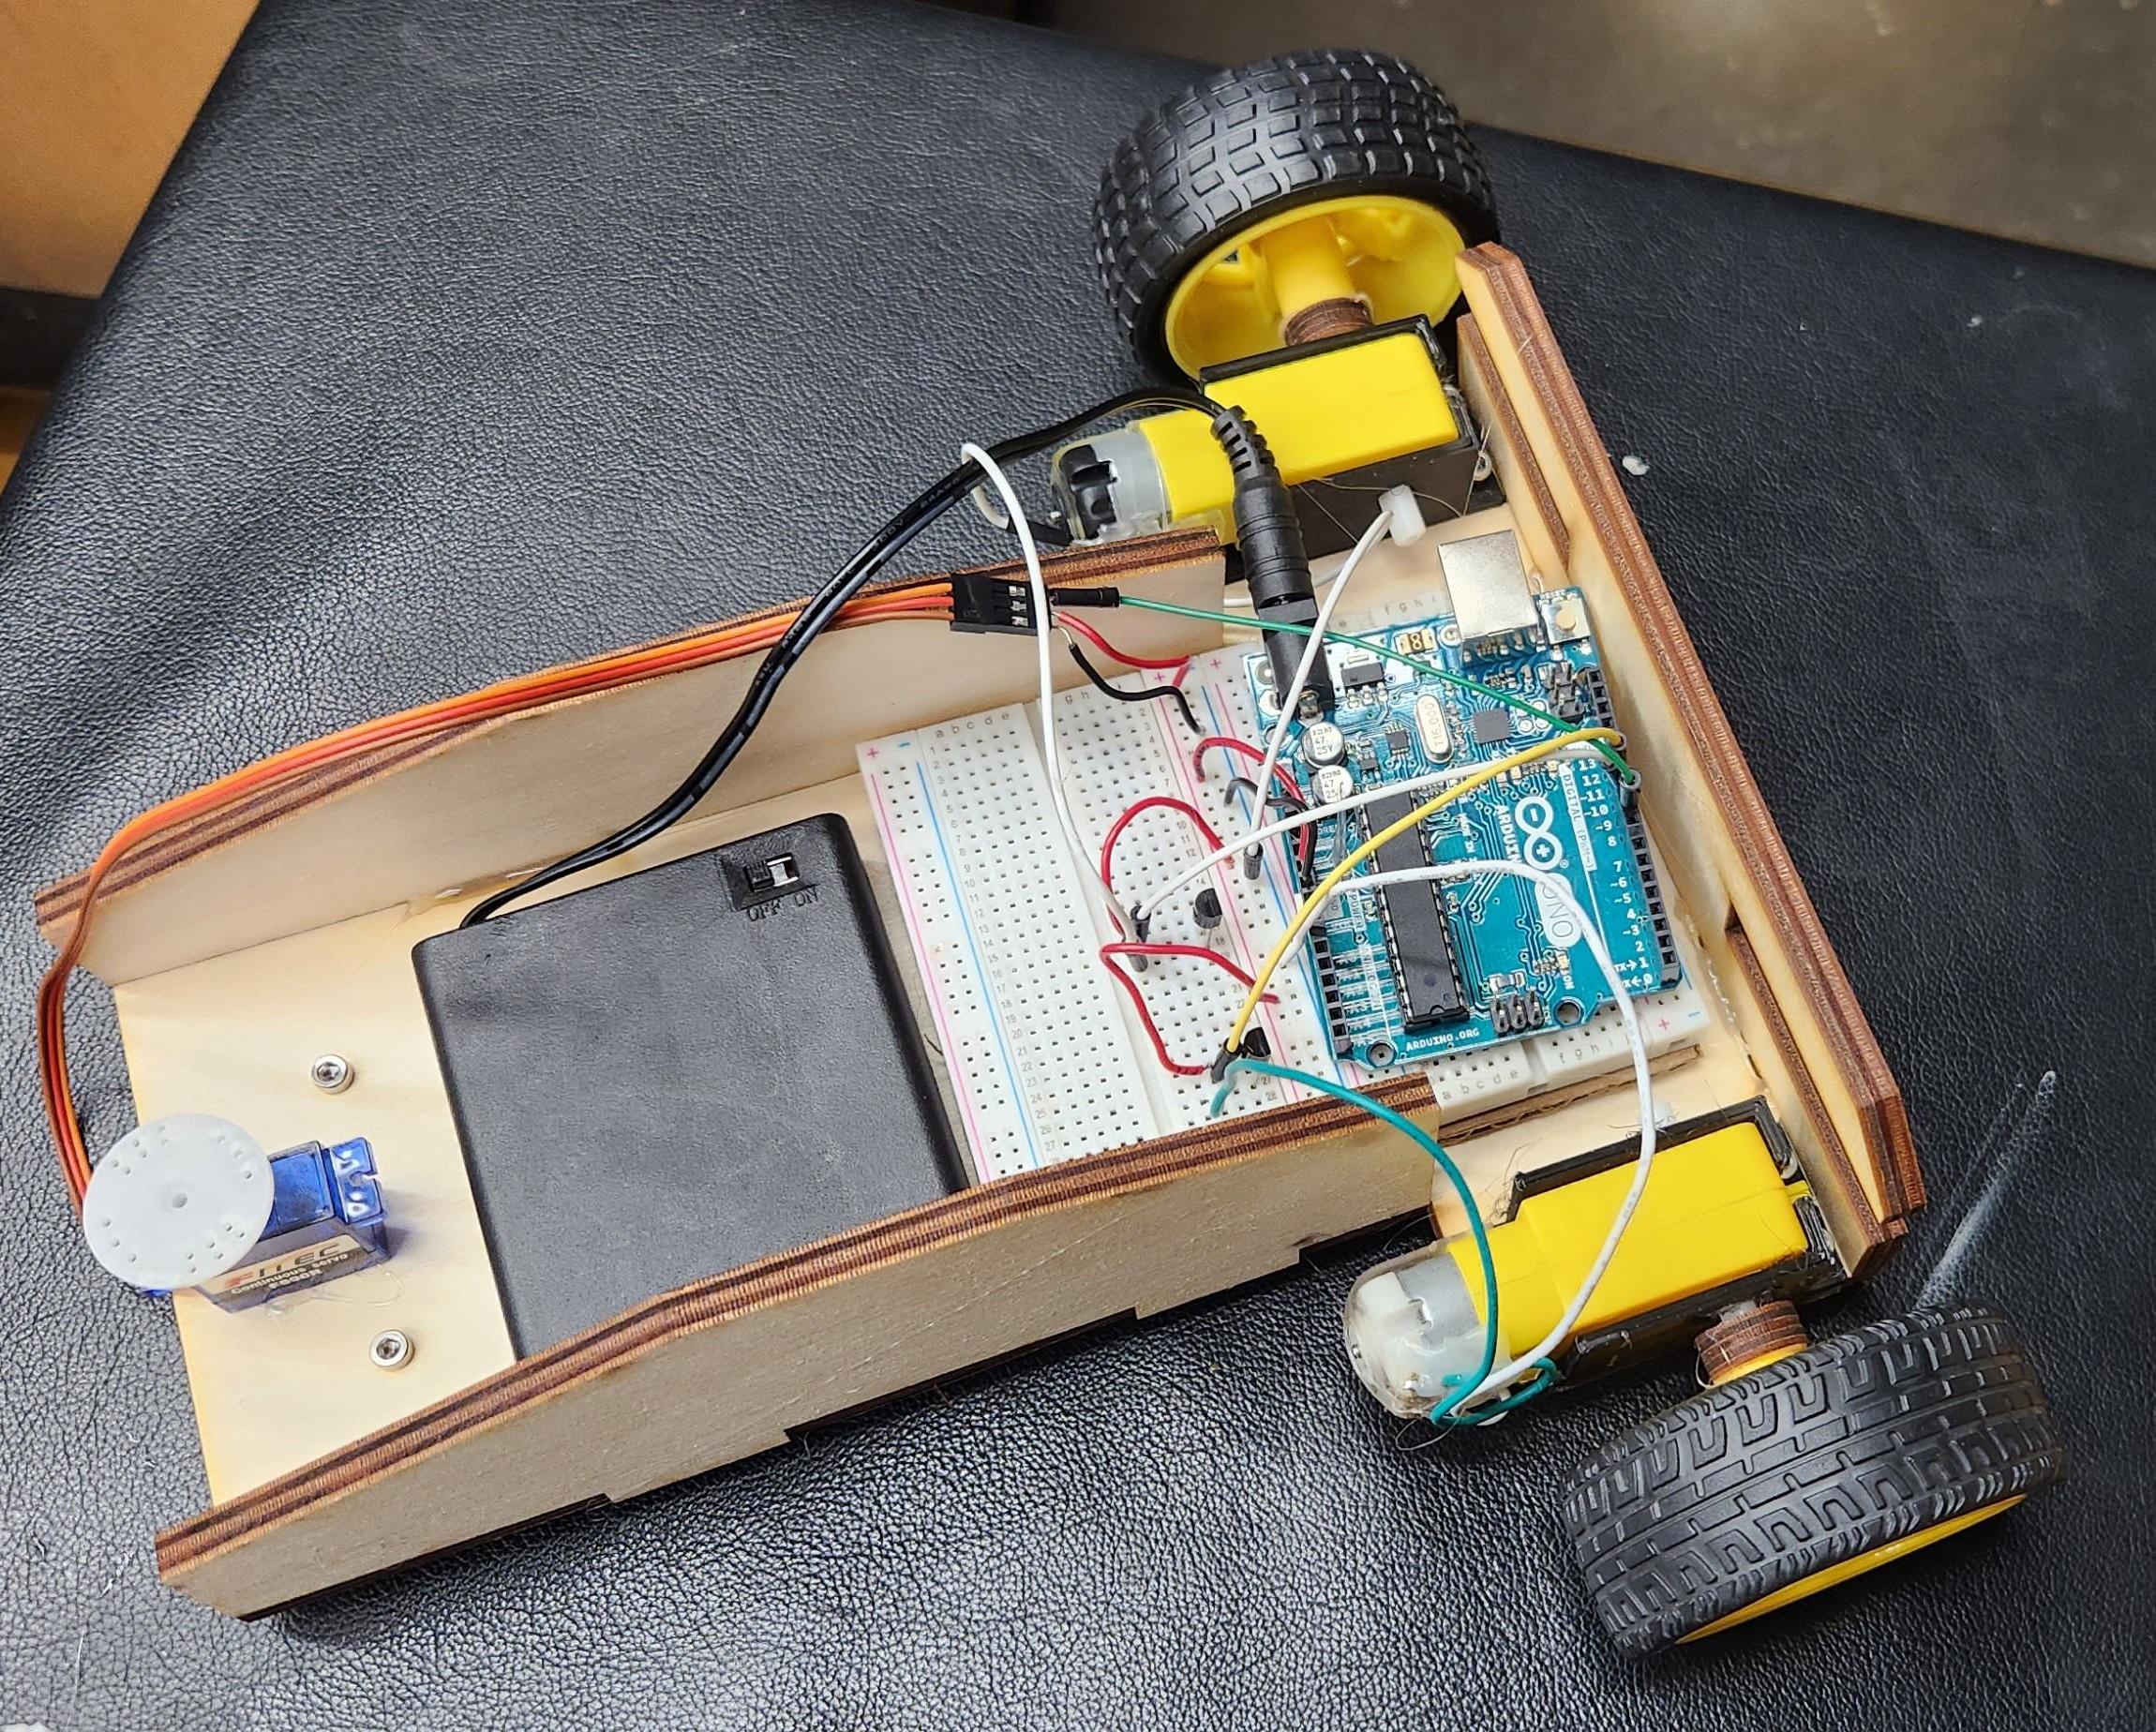 Learning About Engineering With CAD and Arduino With an Autonomous Car